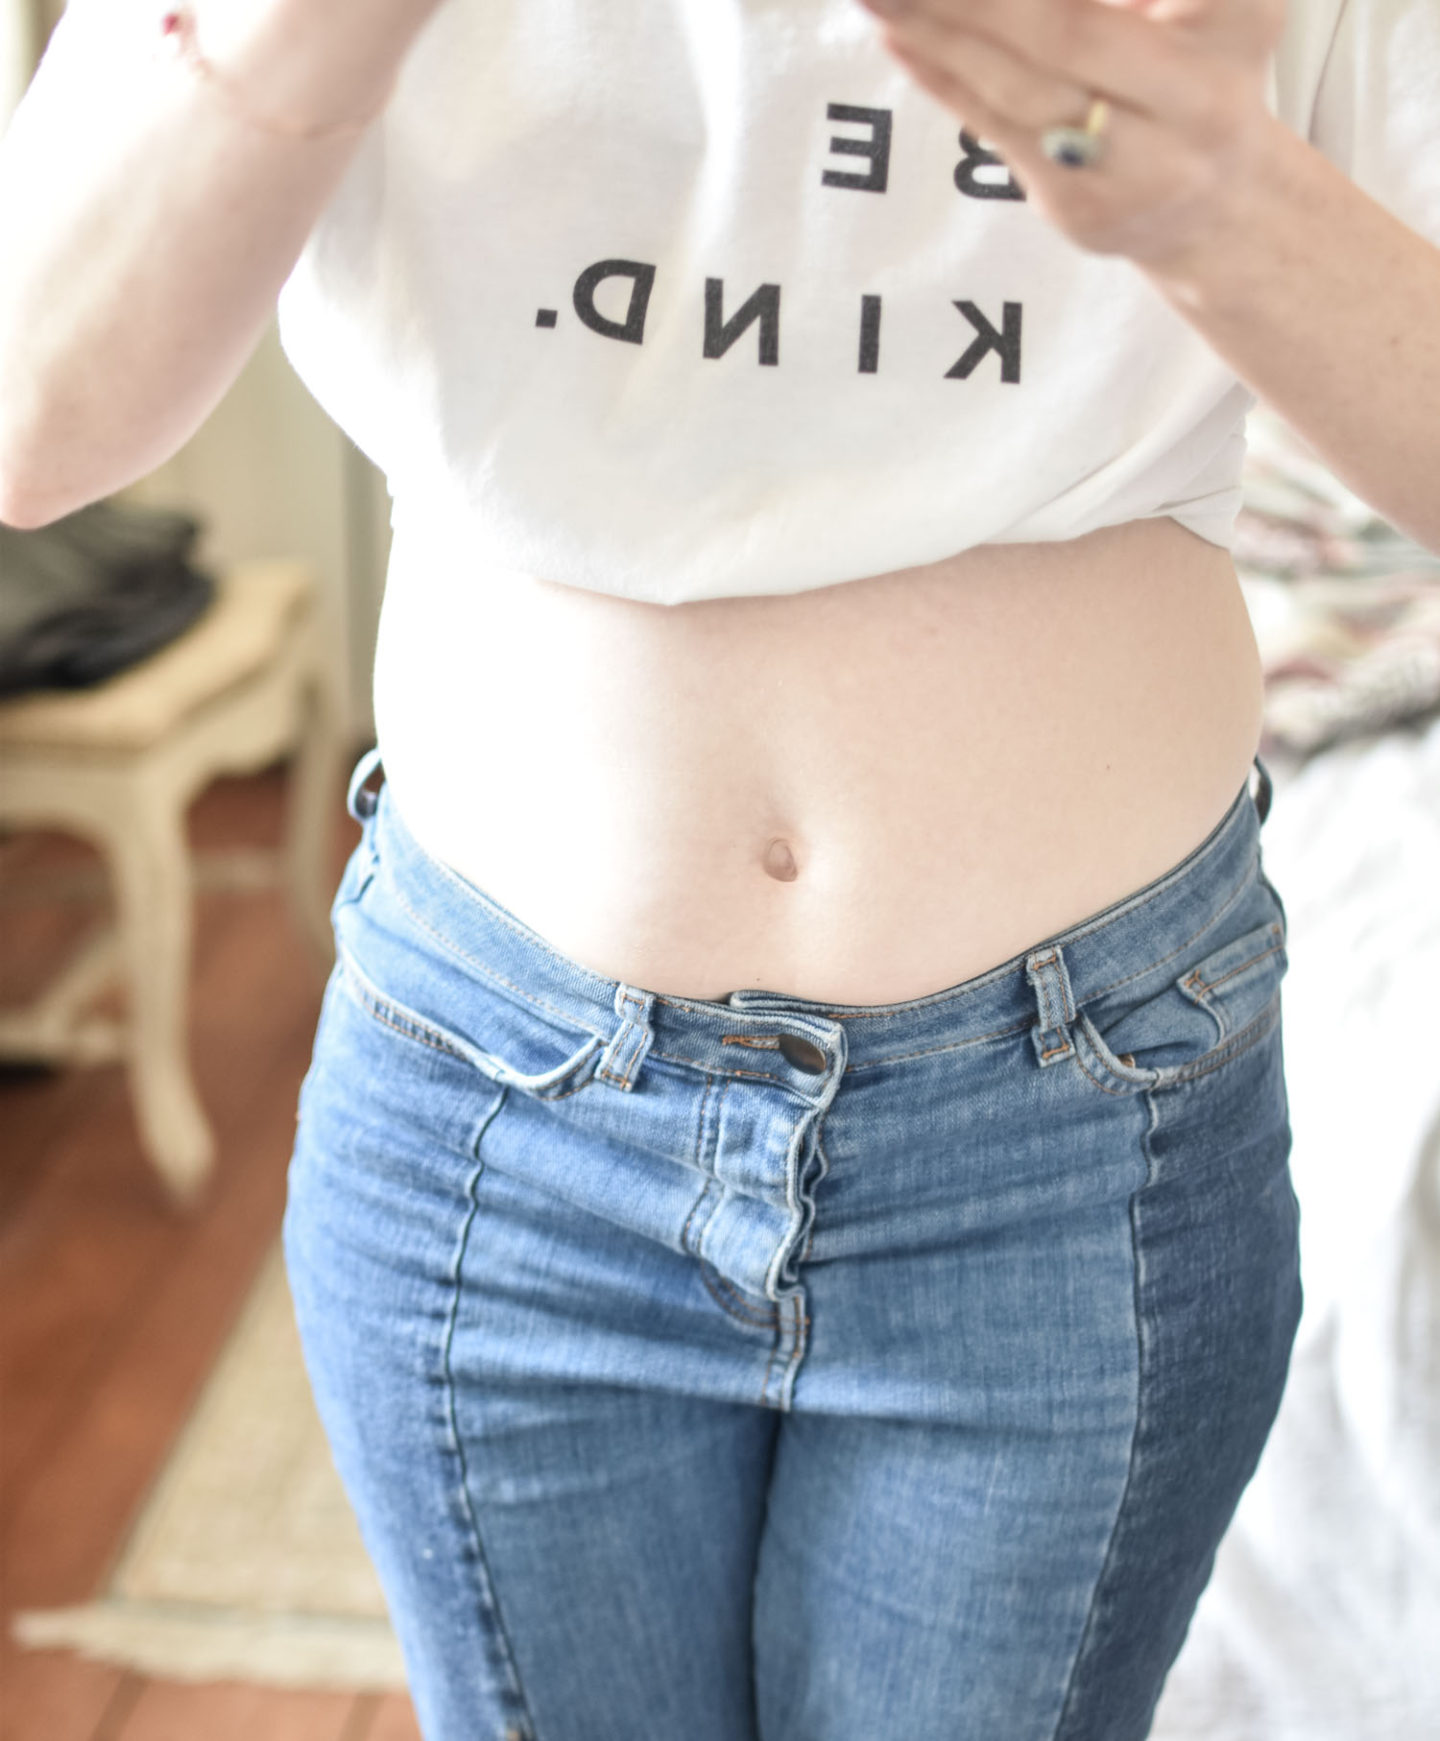 Does MUTU System work? Lifestyle blogger Karen Maurice's tummy before